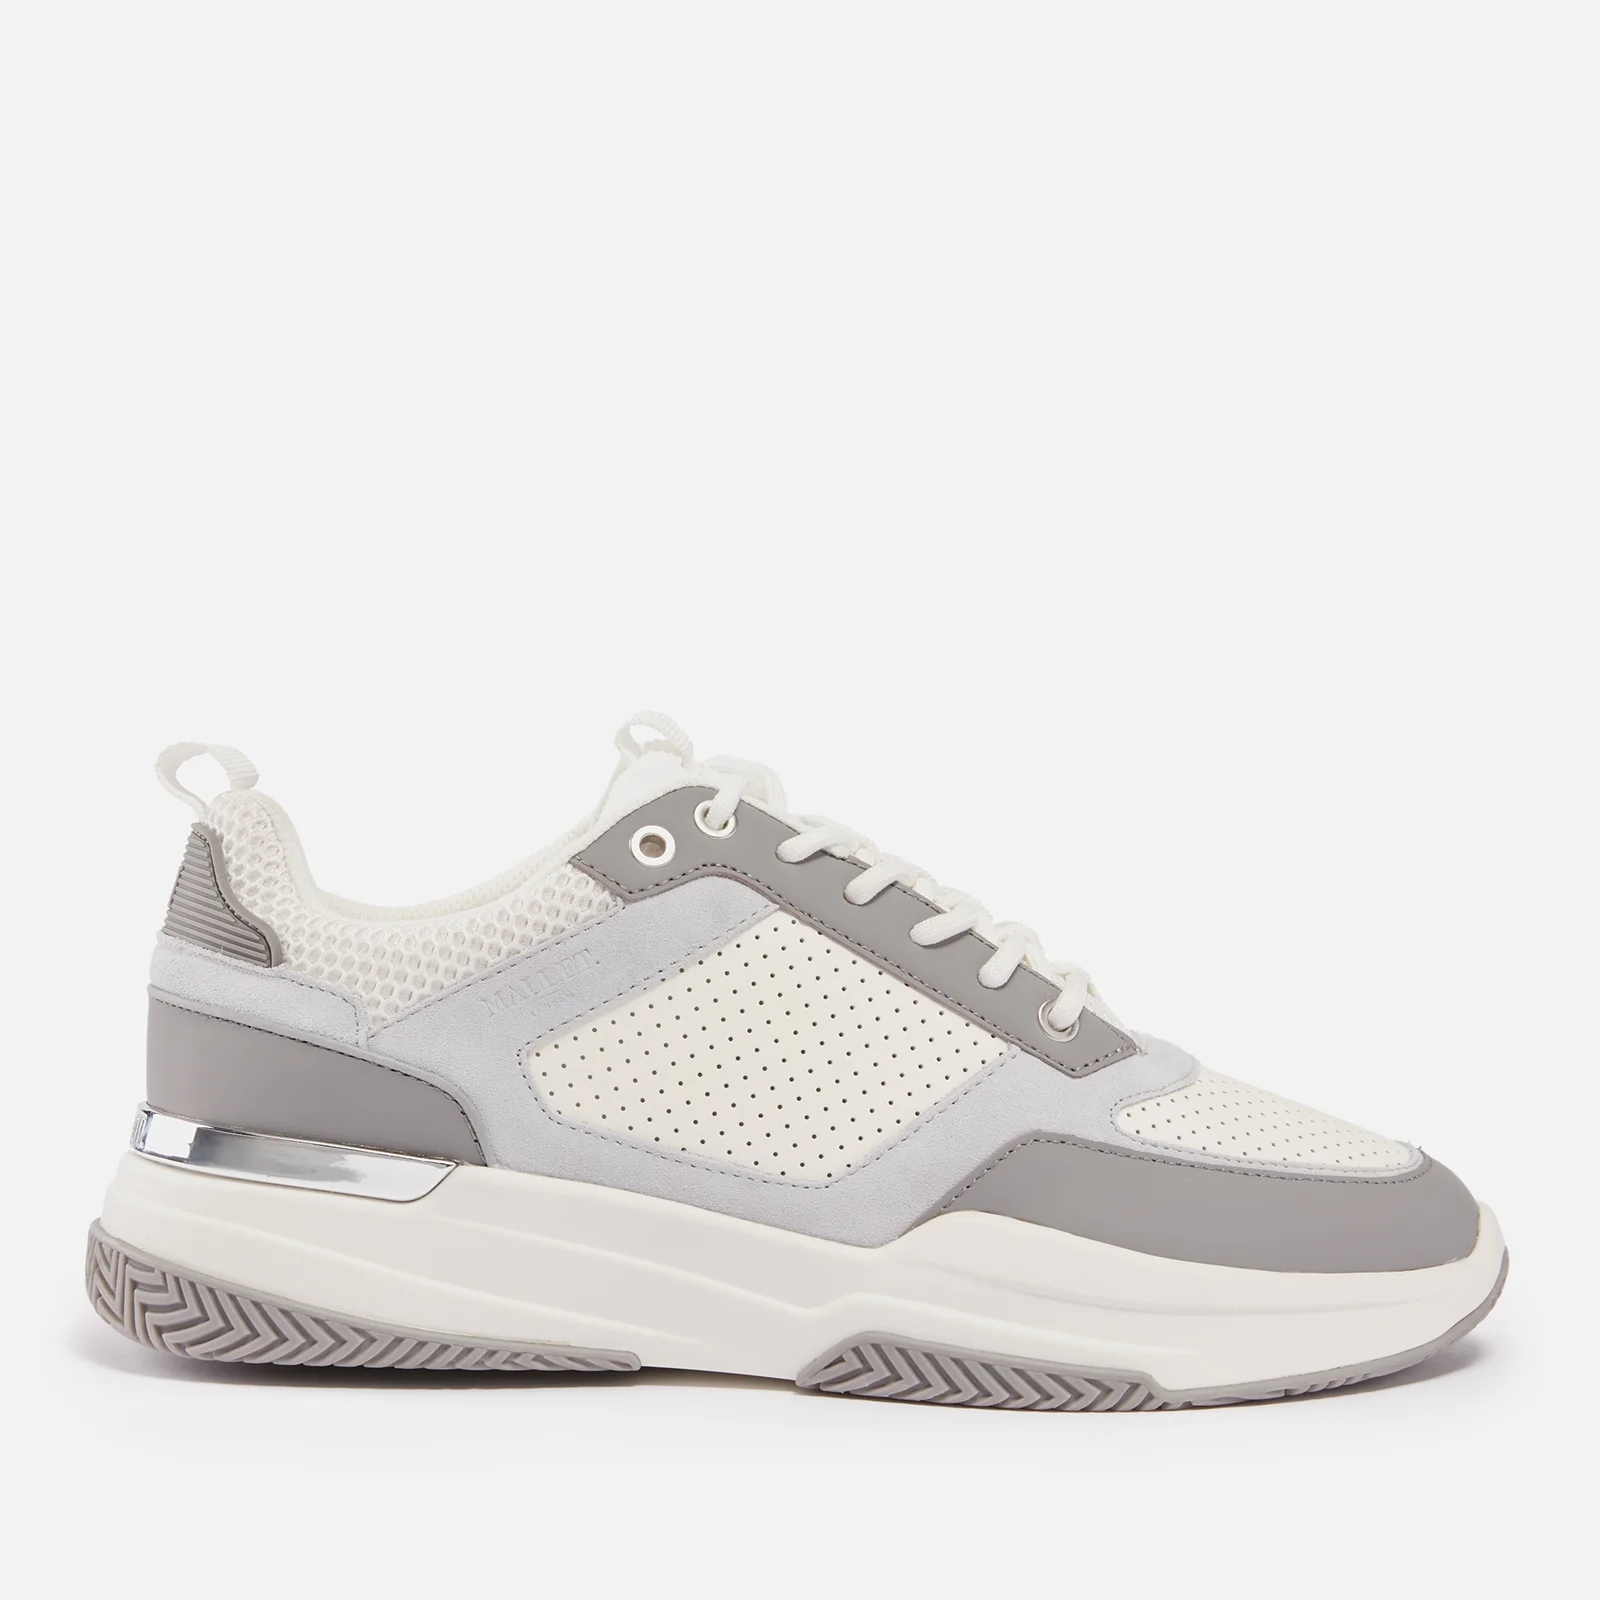 Mallet Men's Radnor Nubuck and Mesh Trainers Image 1